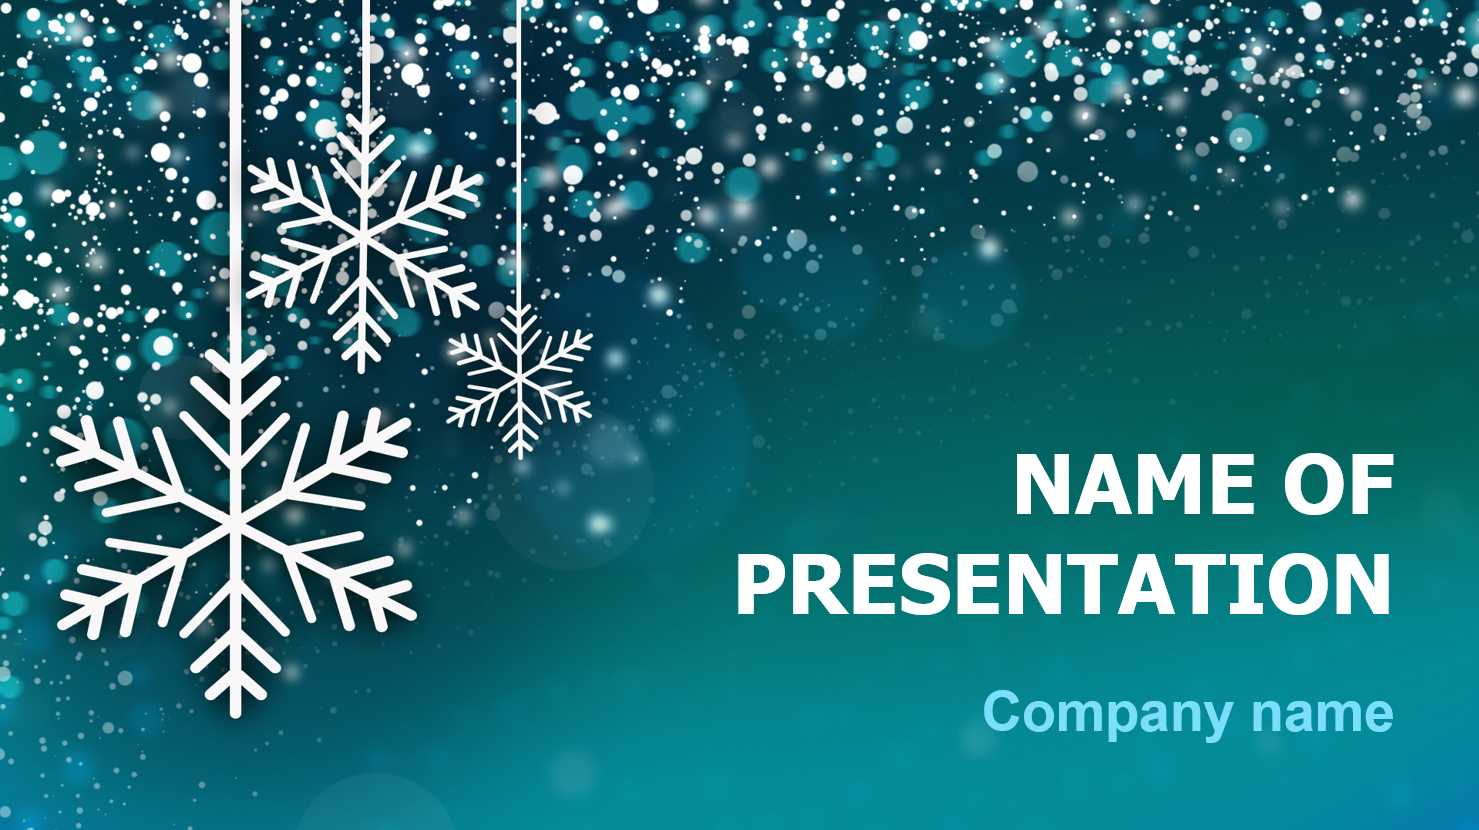 Download Free Snowing Snow Powerpoint Theme For Presentation Regarding Snow Powerpoint Template